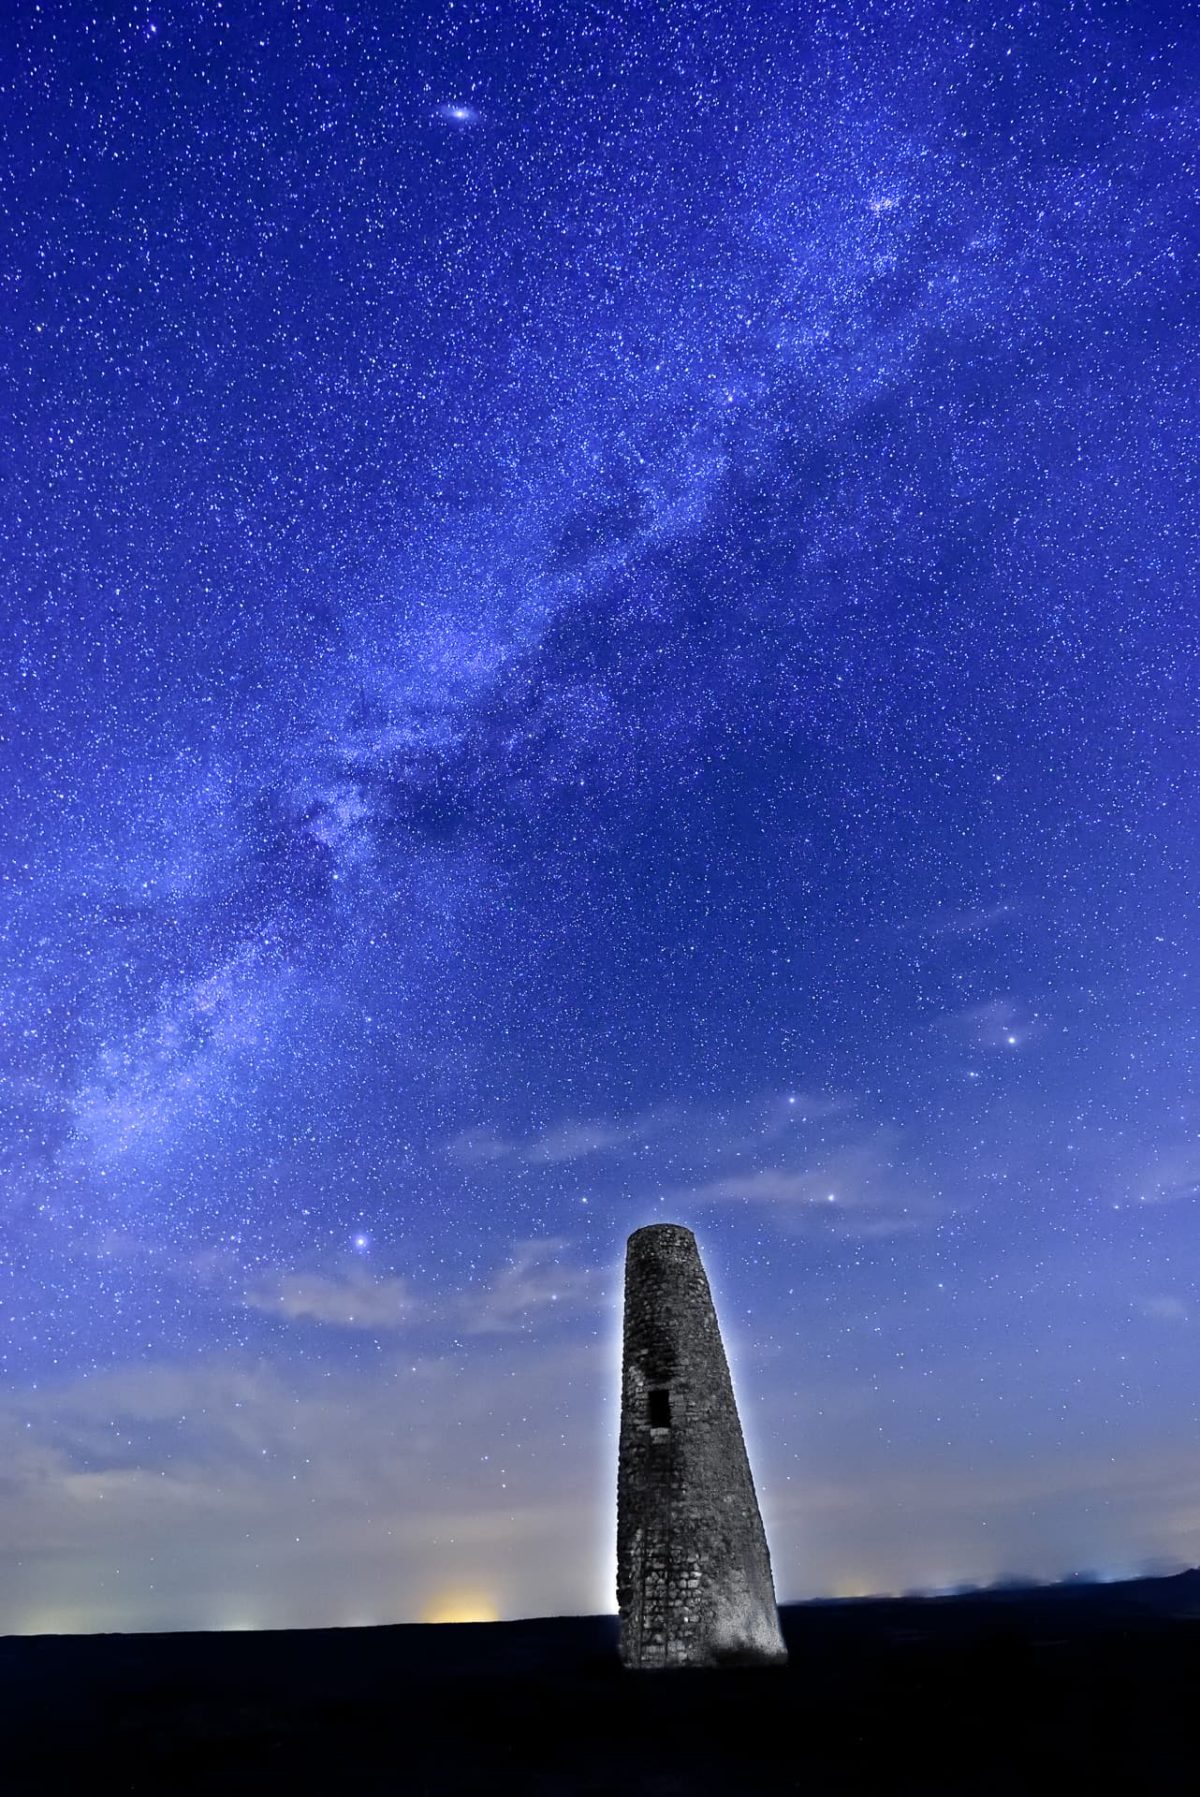 Milky way over islamic watchover tower